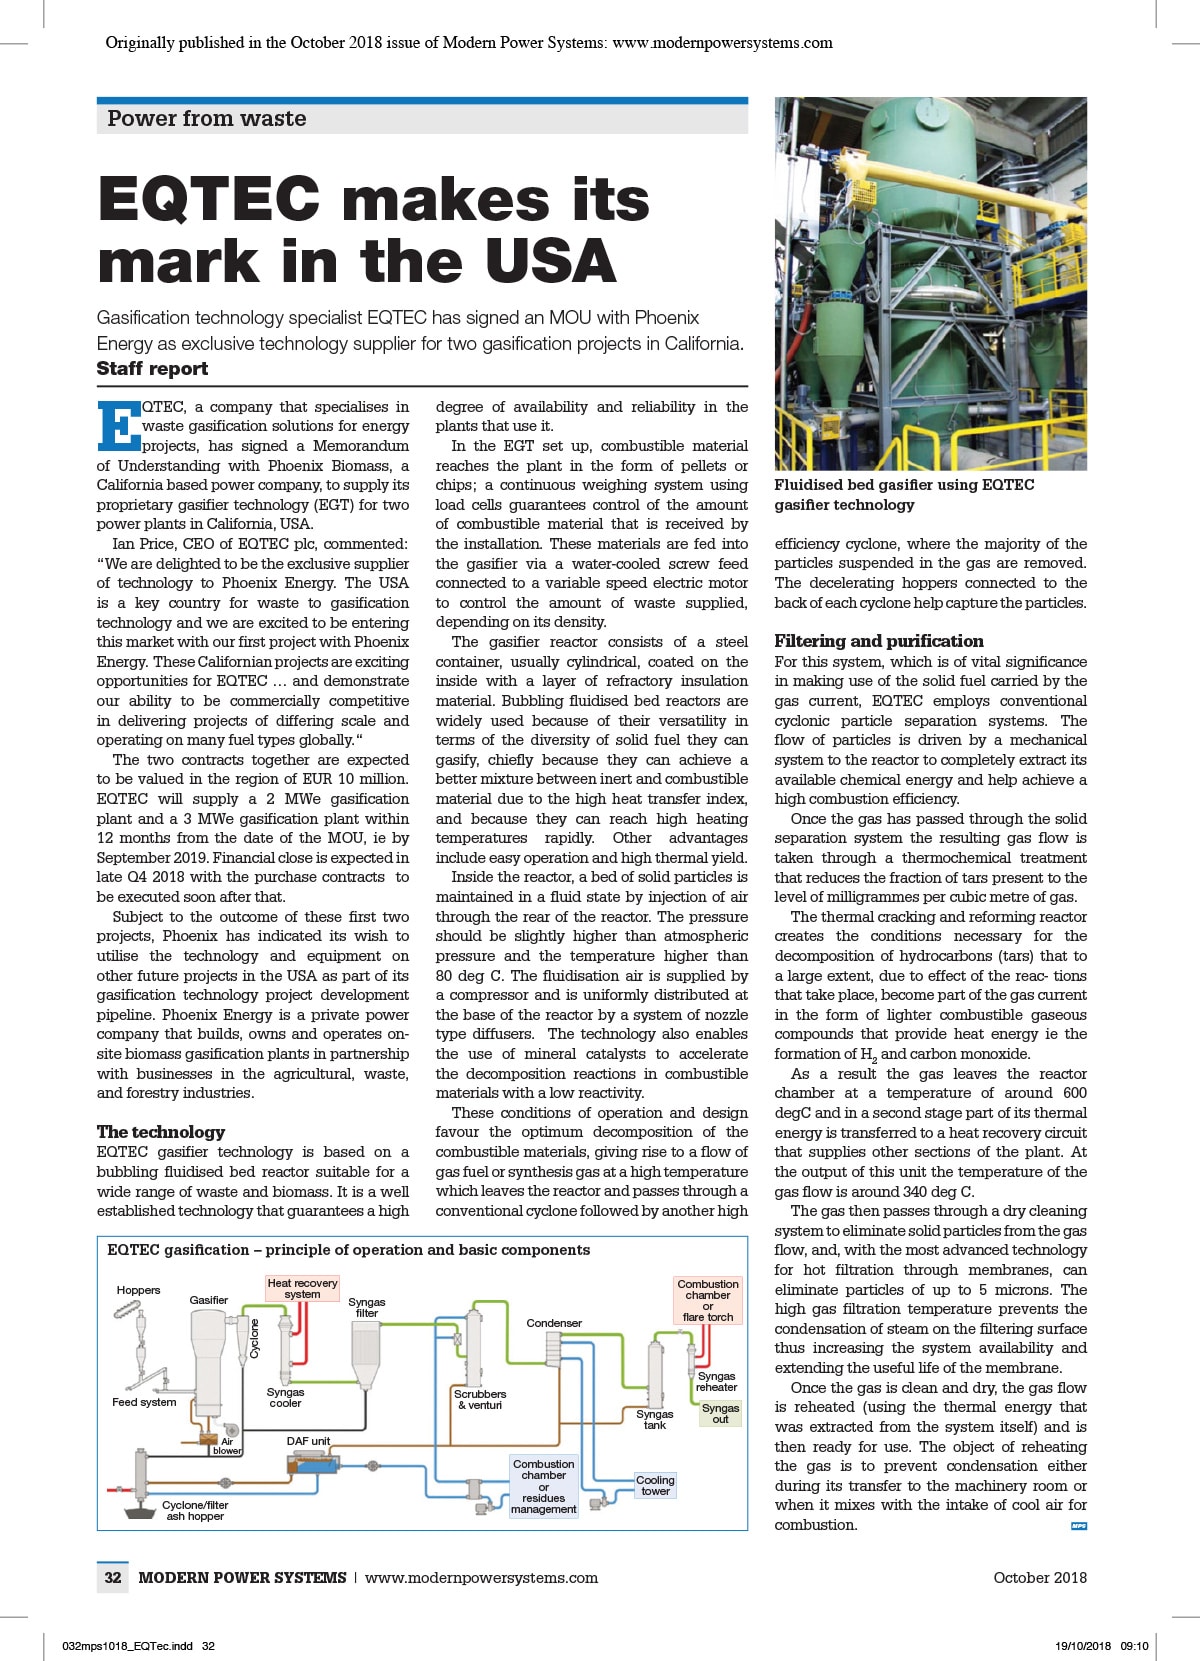 EQTEC makes its mark in the USA